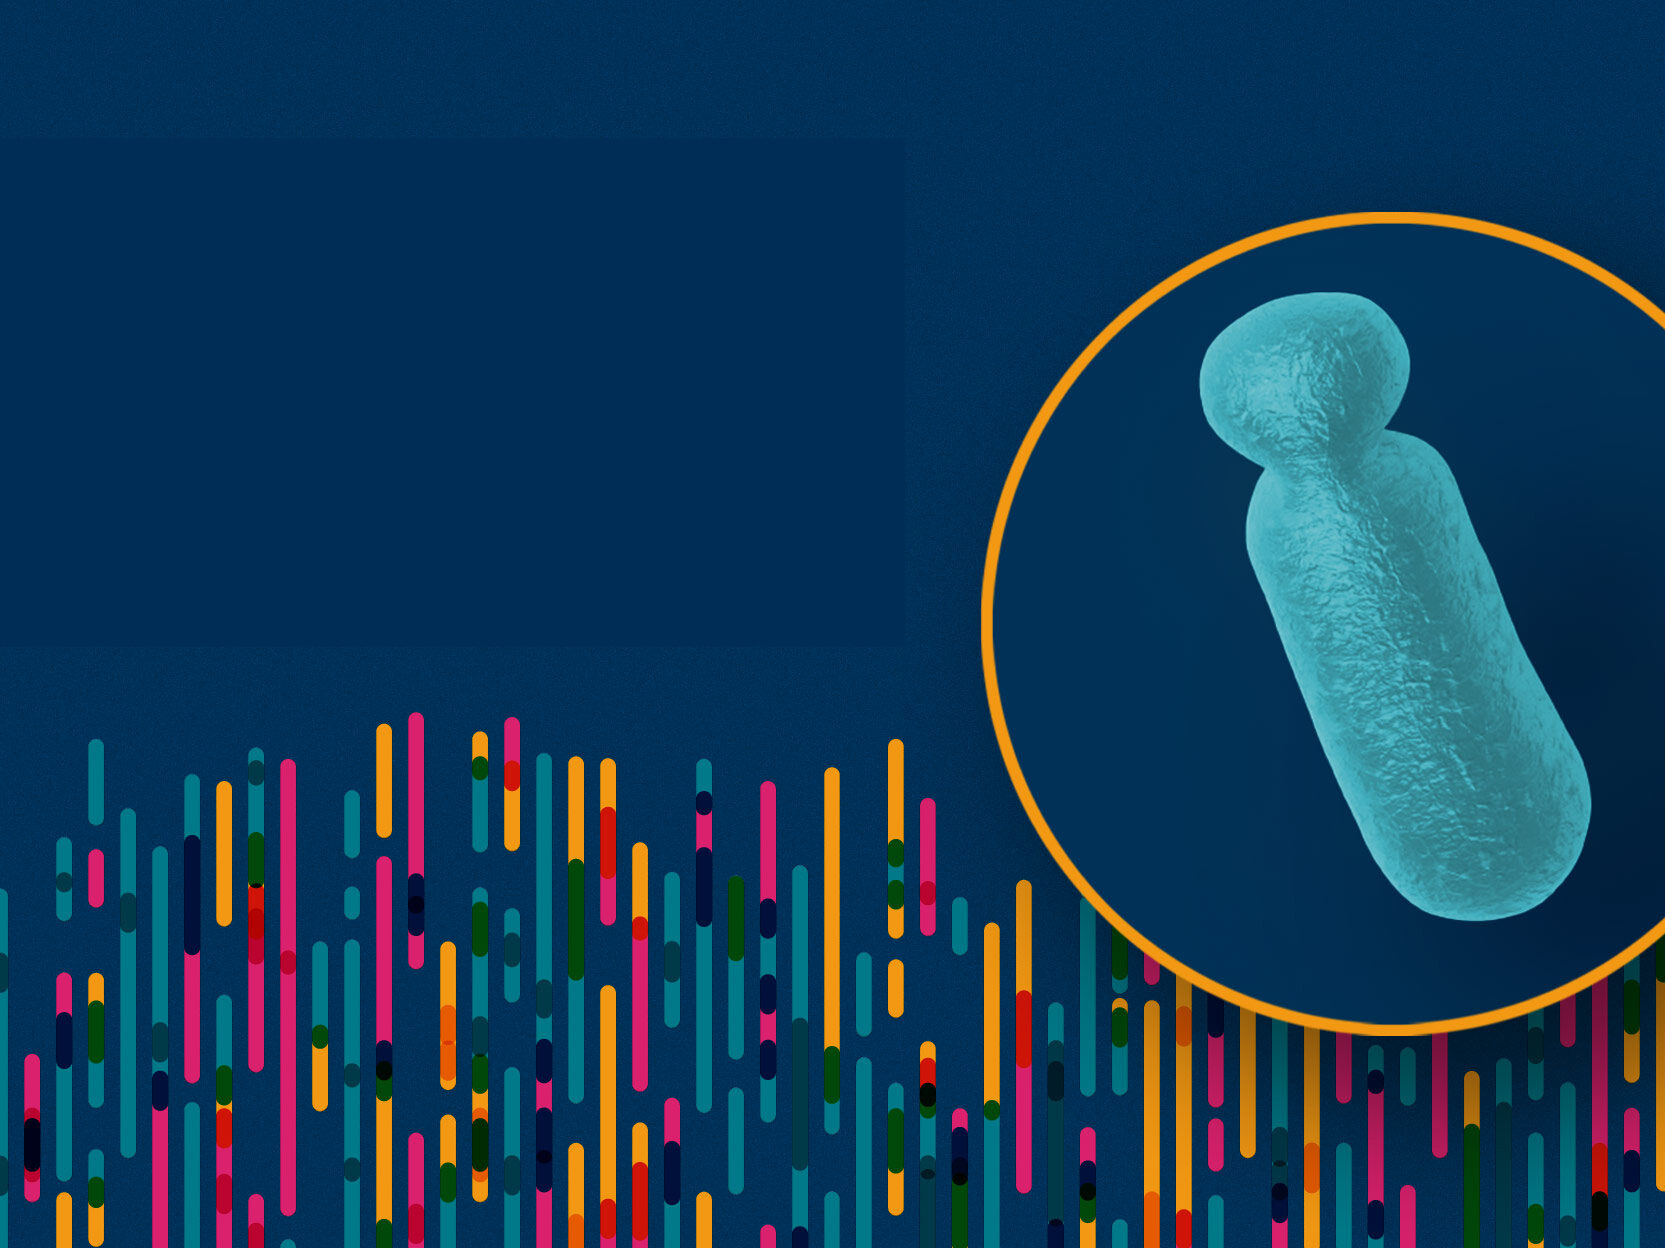 Graphic illustration with bright colors and close up of a chromosome.